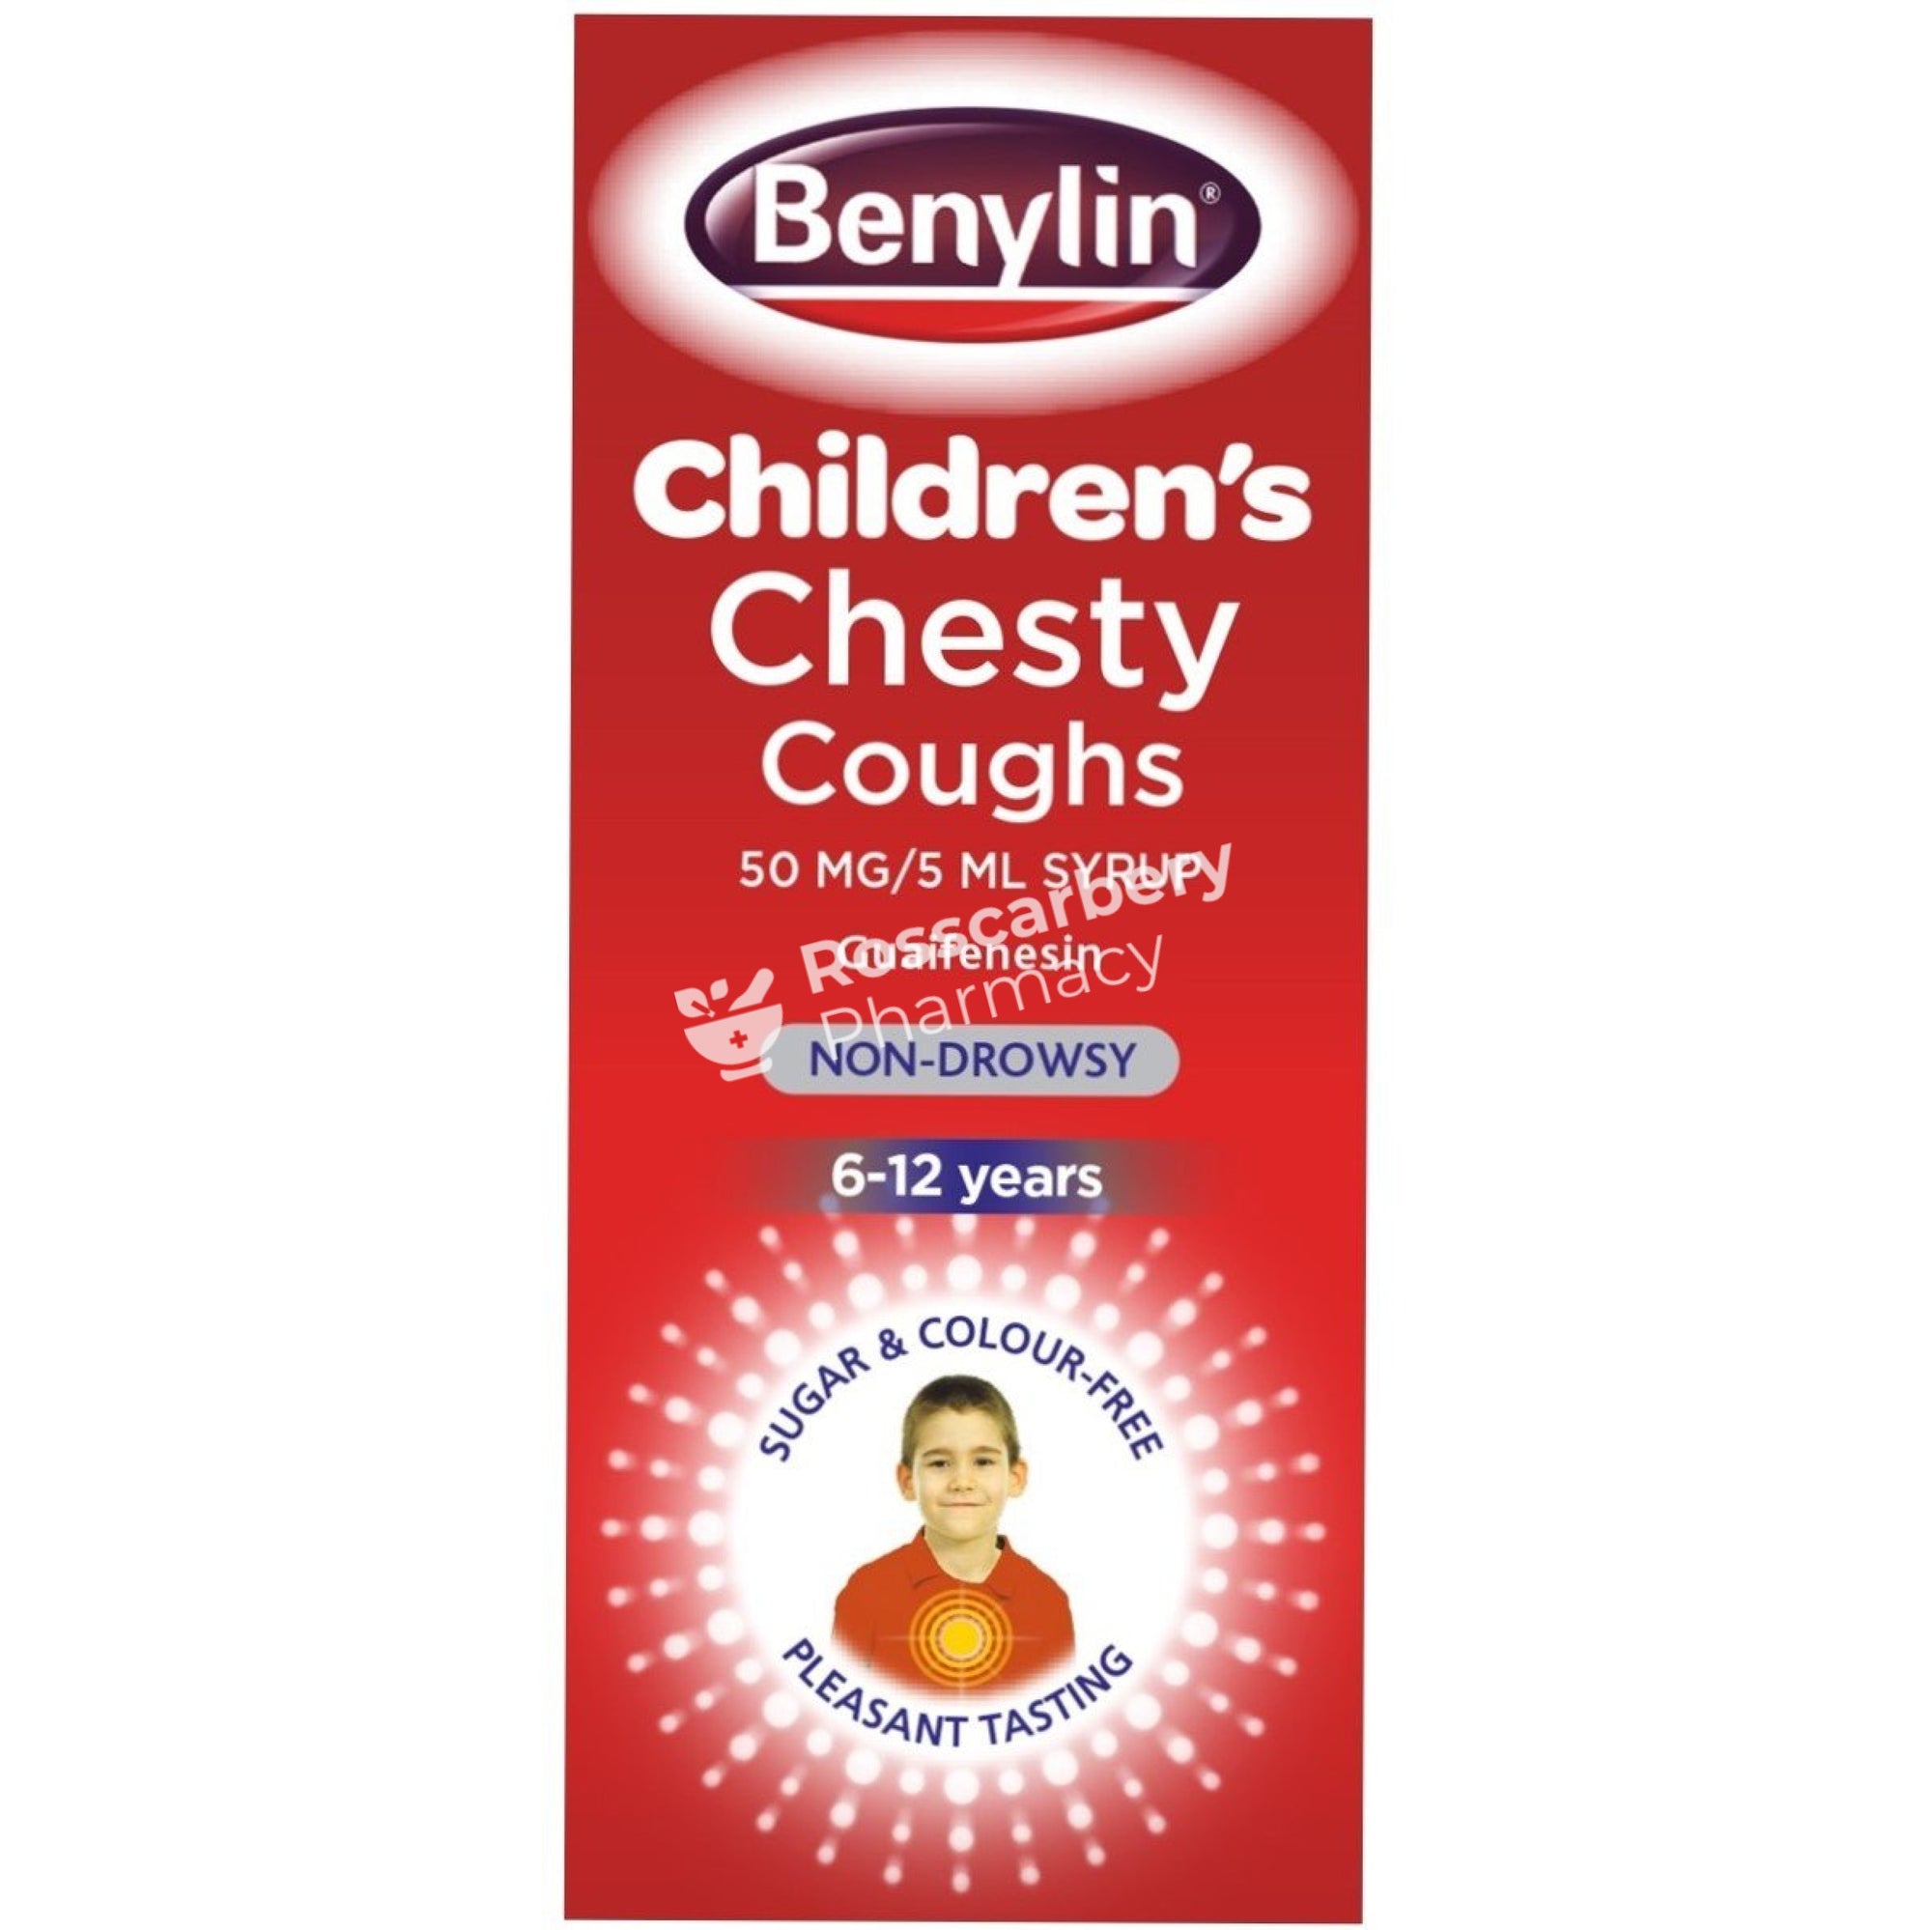 Benylin Childrens Chesty Coughs Non-Drowsy Syrup (6-12Yrs) Cough Bottles